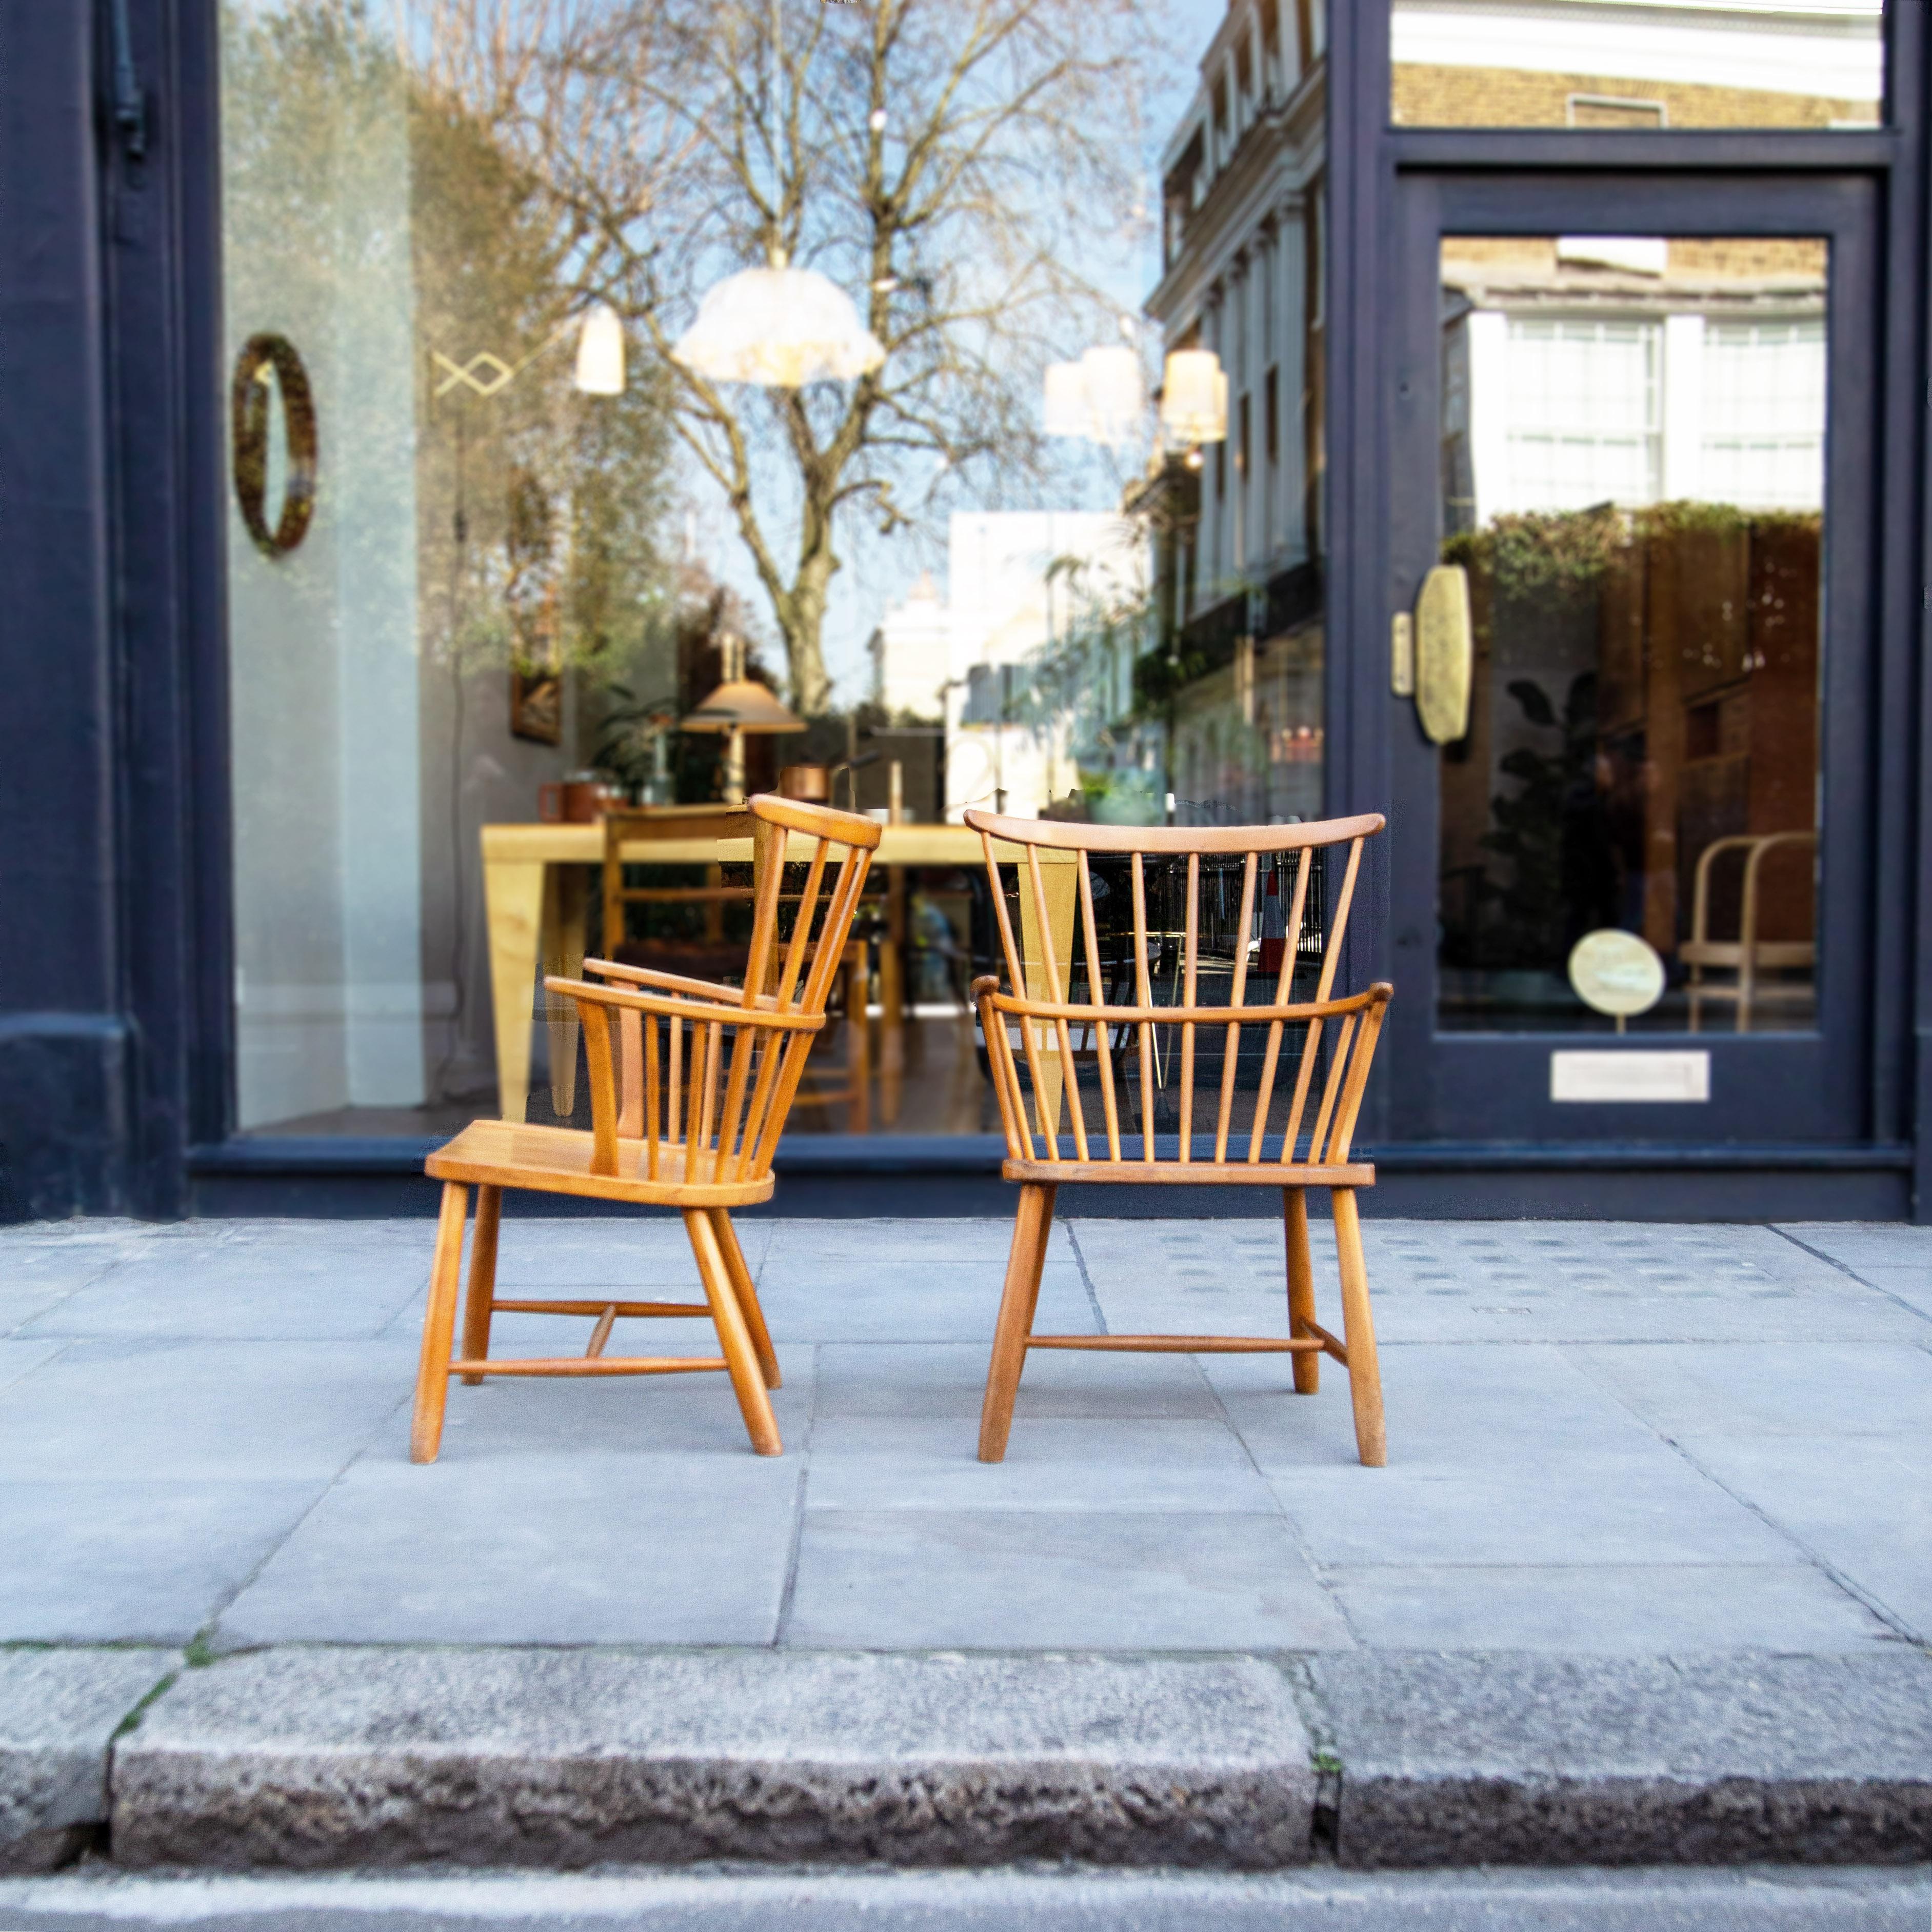 A pair of vintage Windsor chairs, designed by Ove Boldt in 1947 and made by Fritz Hansen circa 1950.

The model 1638 chair is a Danish architect’s version of a ‘Windsor Chair’, a vernacular British design thought to date back to the 16th